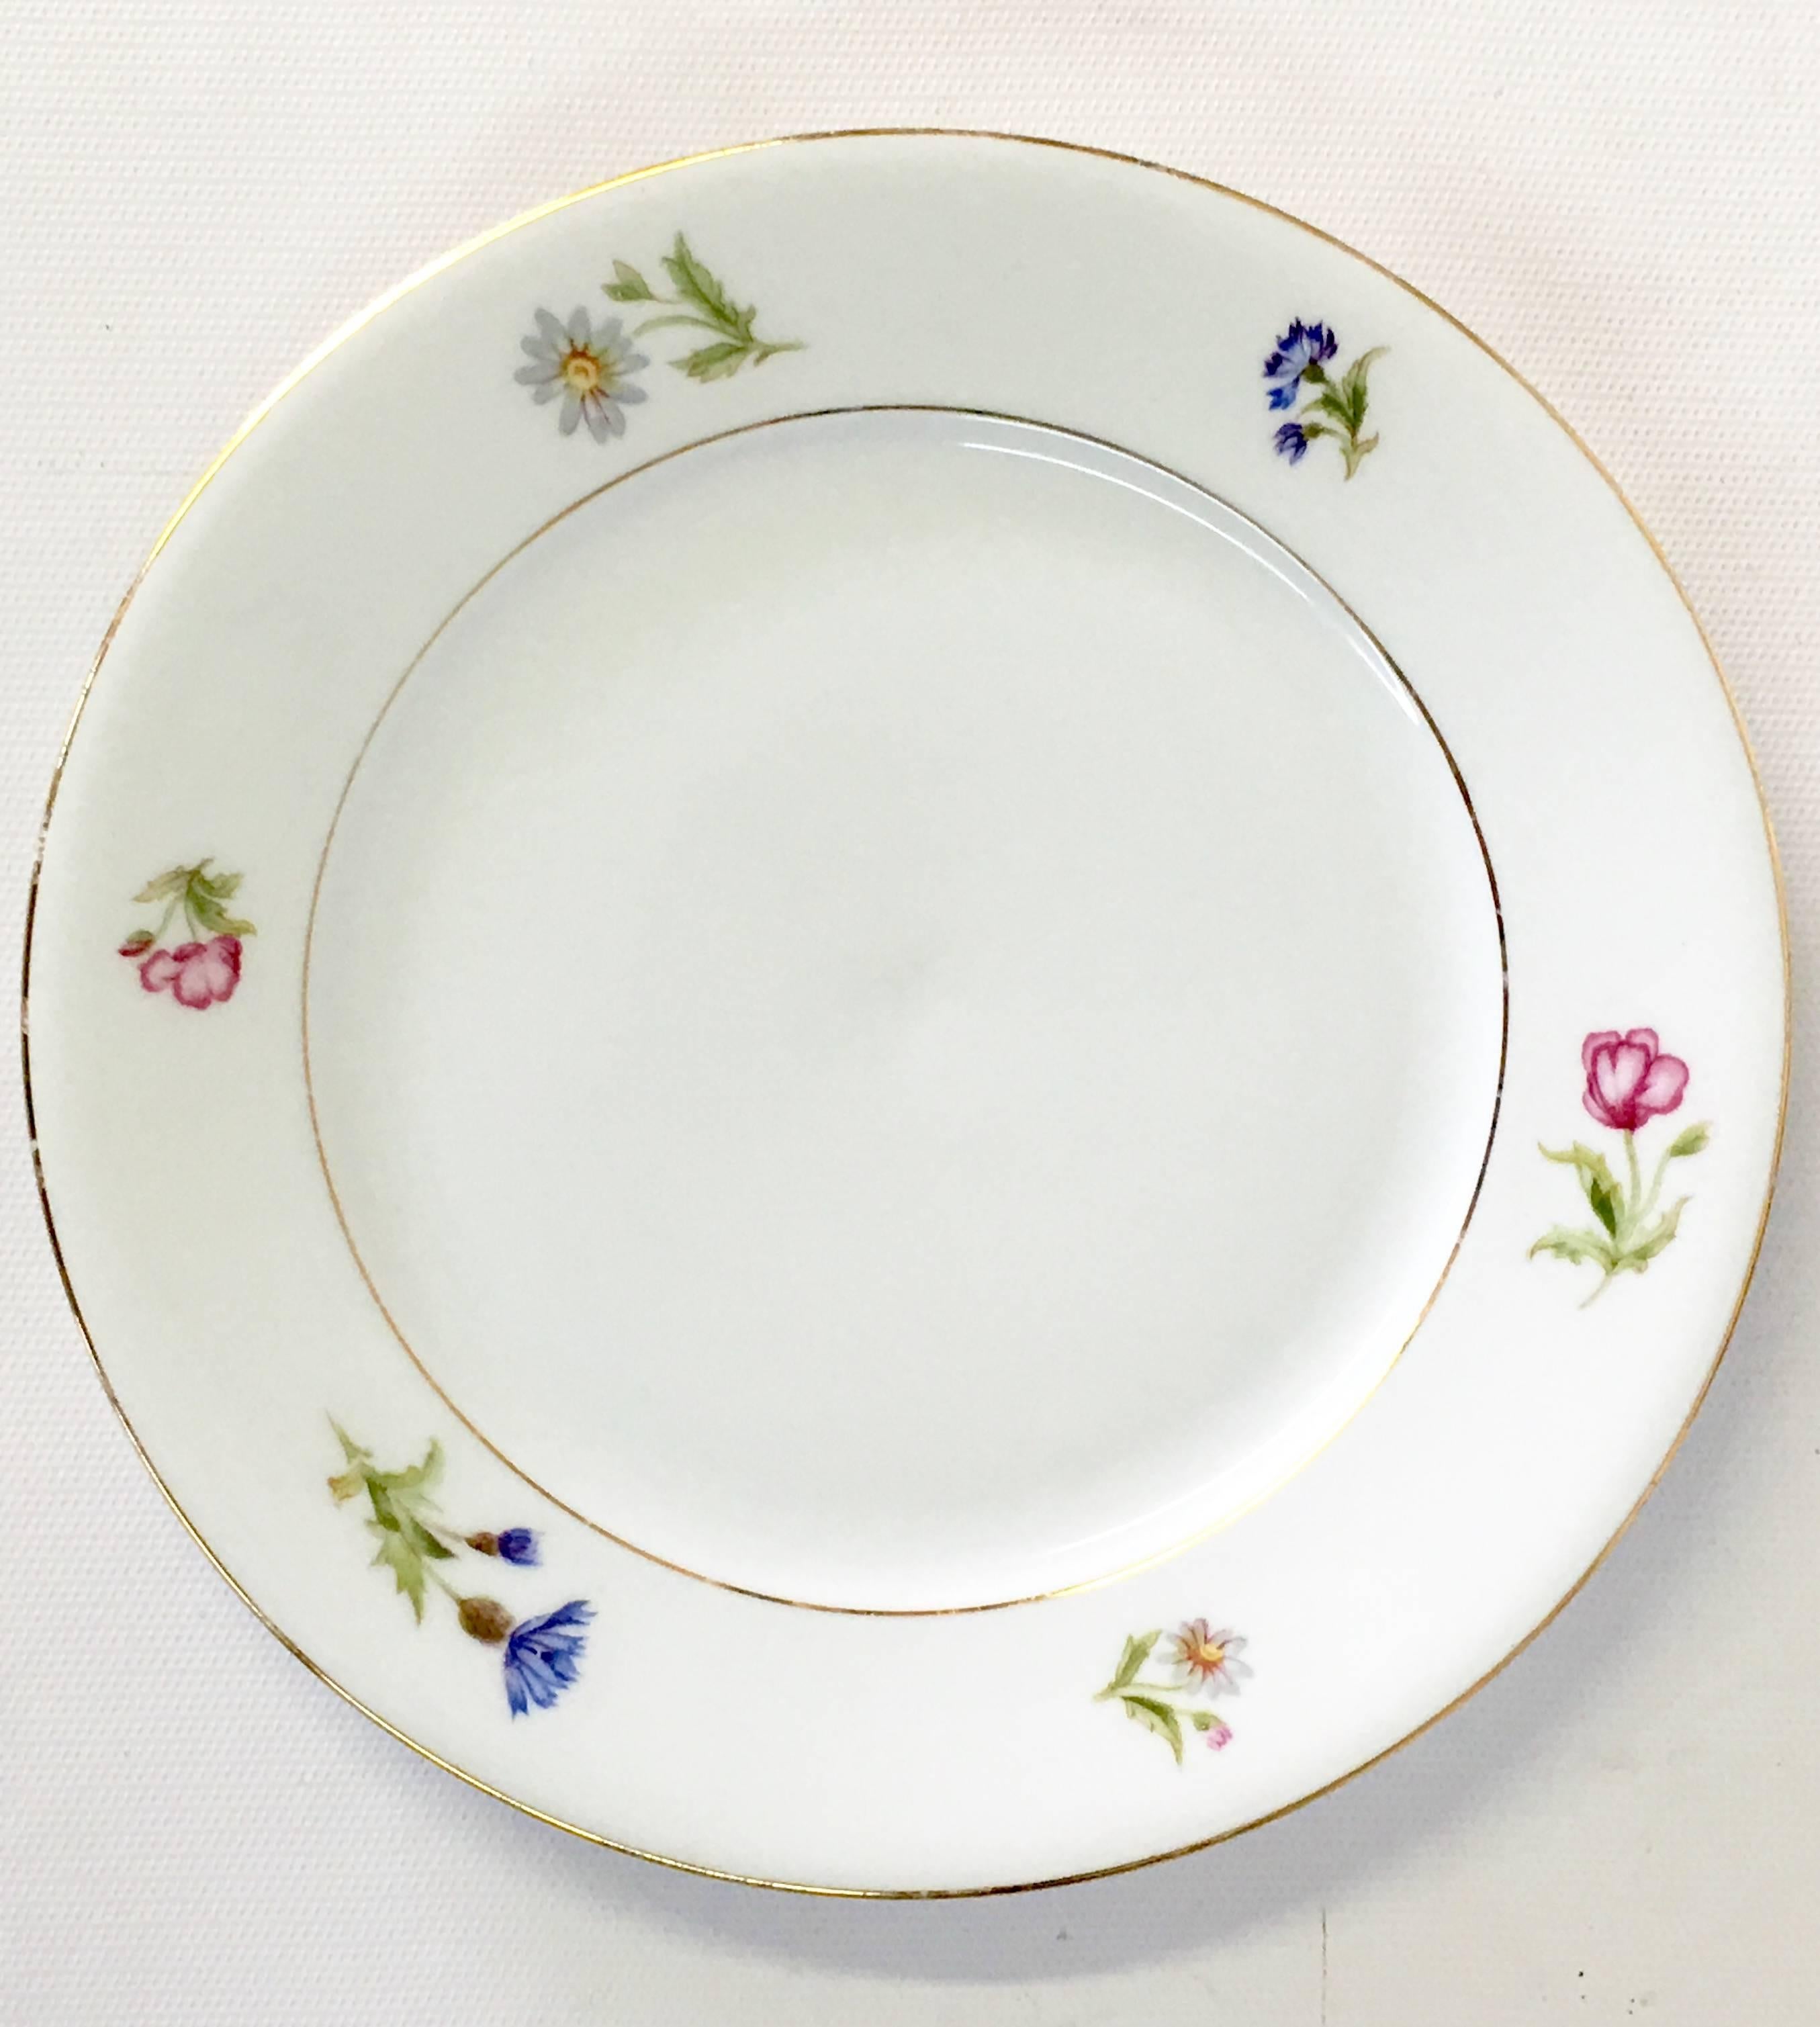 Vintage Meissen style Bavaria Germany white ground with scattered floral edge and 22K gold rim hand painted porcelain dinnerware. This 39-piece set includes, ten salad/dessert plates, eight soup/cereal coupe bowls, ten bread/butter plates and eleven